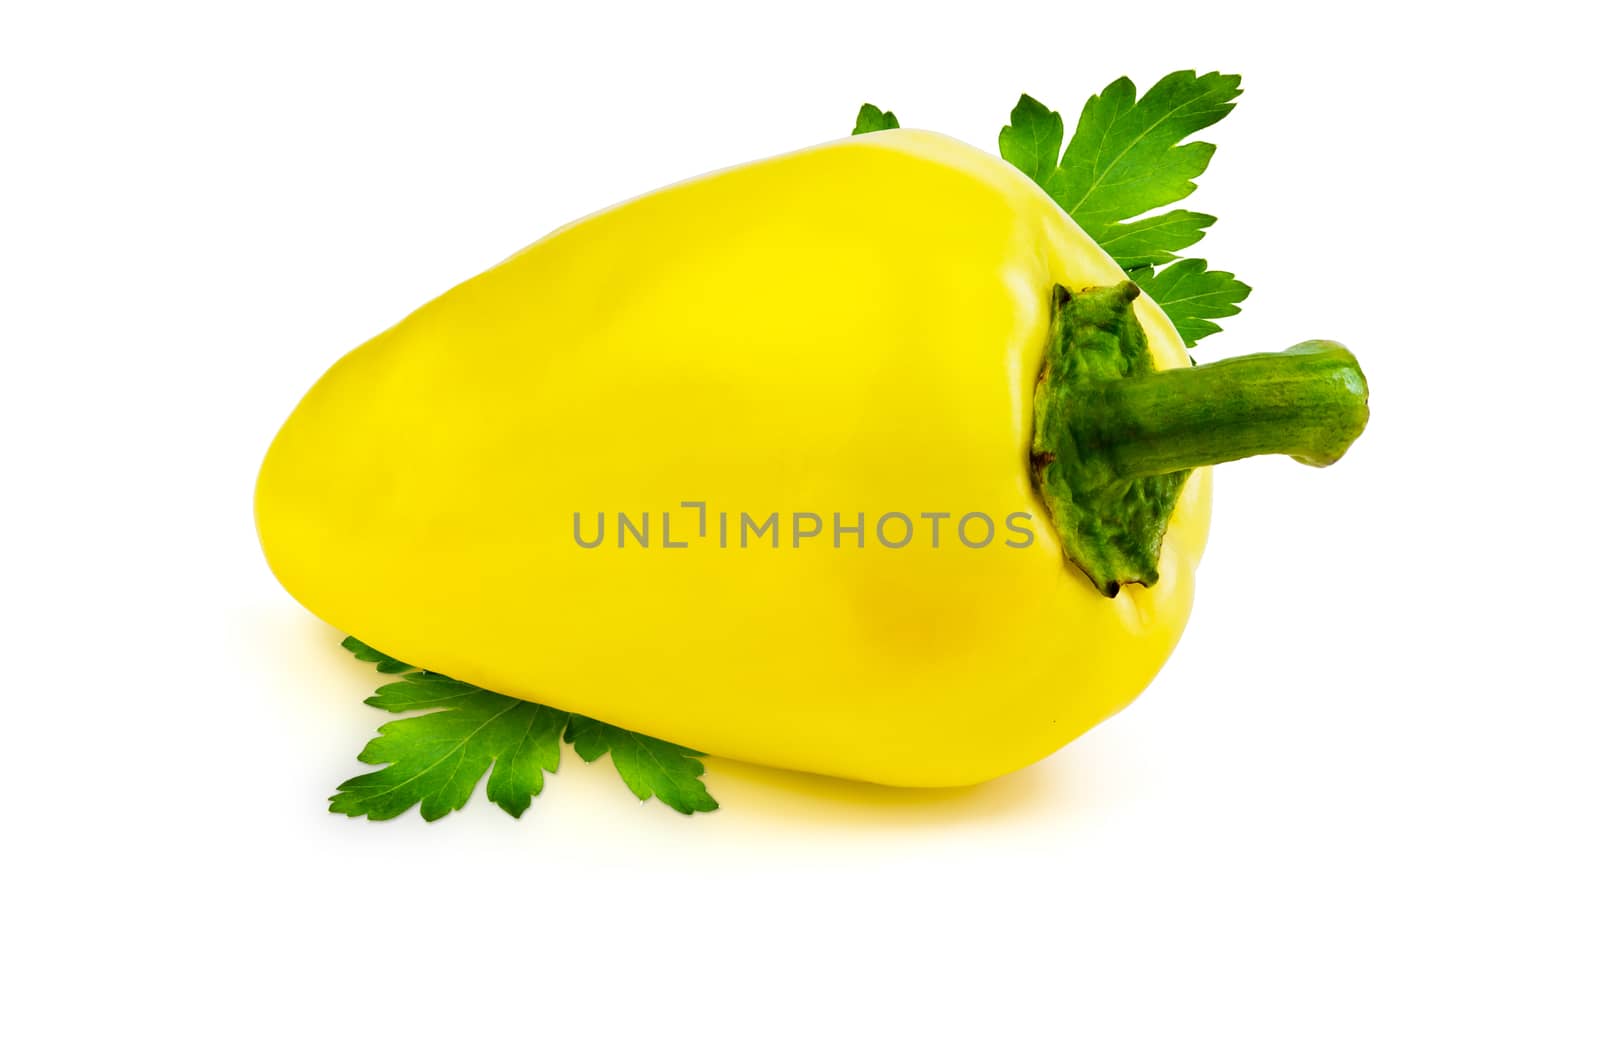 Juicy yellow sweet pepper and green parsley leaves on white background